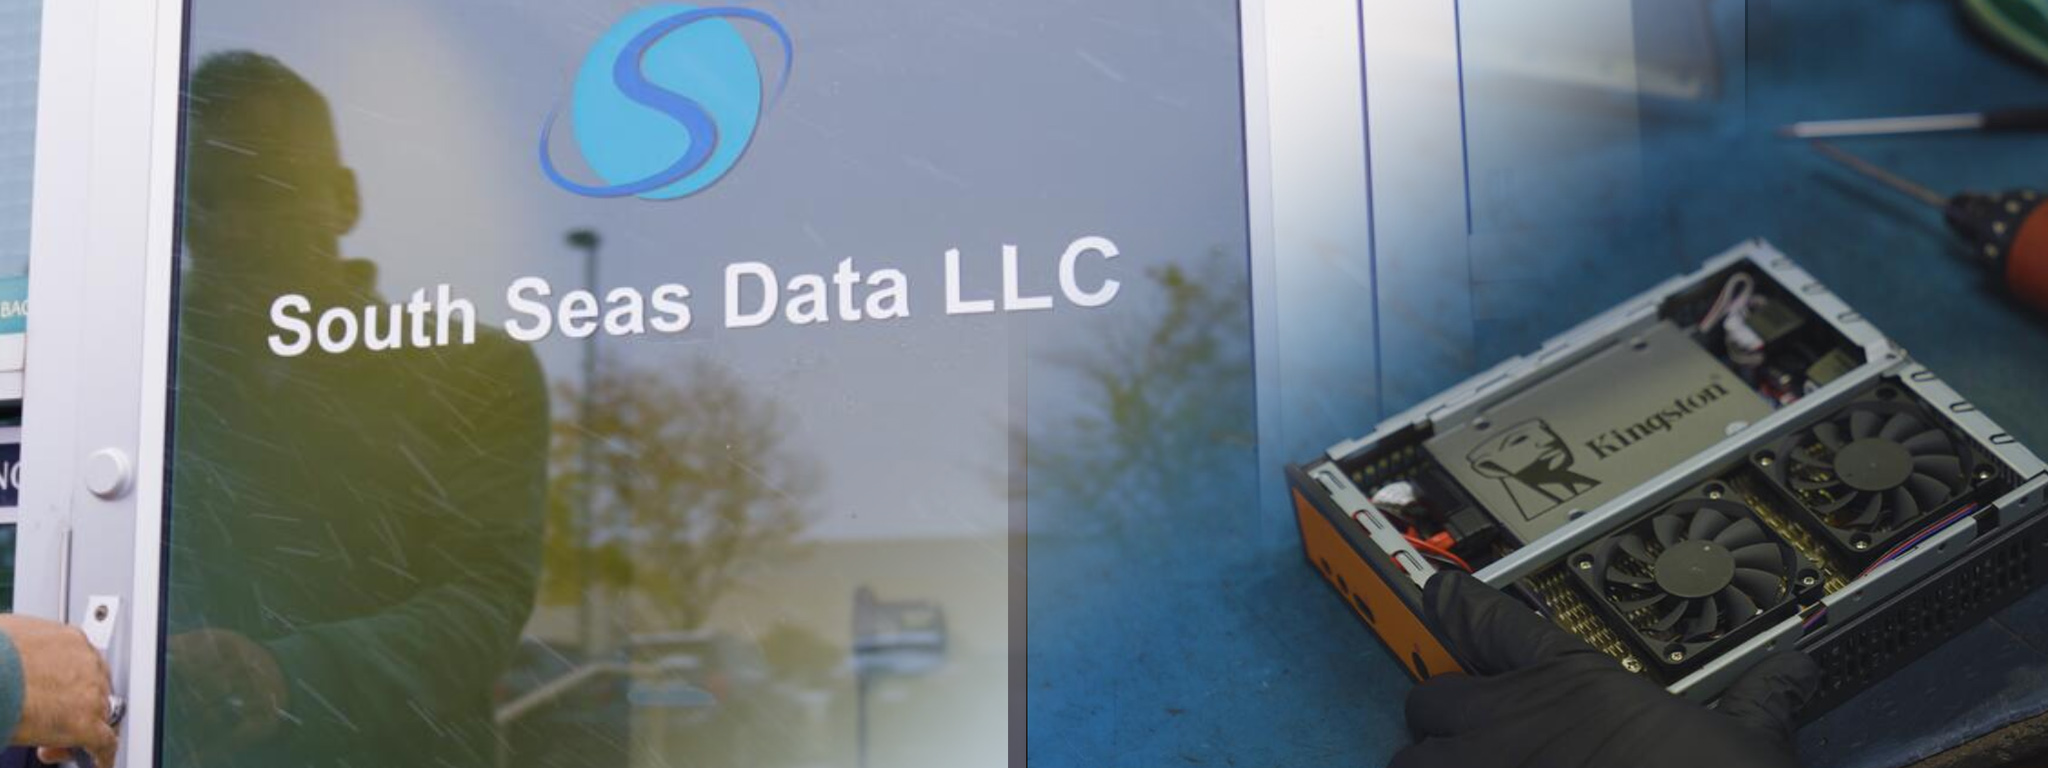 The front door of South Seas Data LLC’s headquarters and a superimposed image of a system prominently featuring a Kingston SSD.